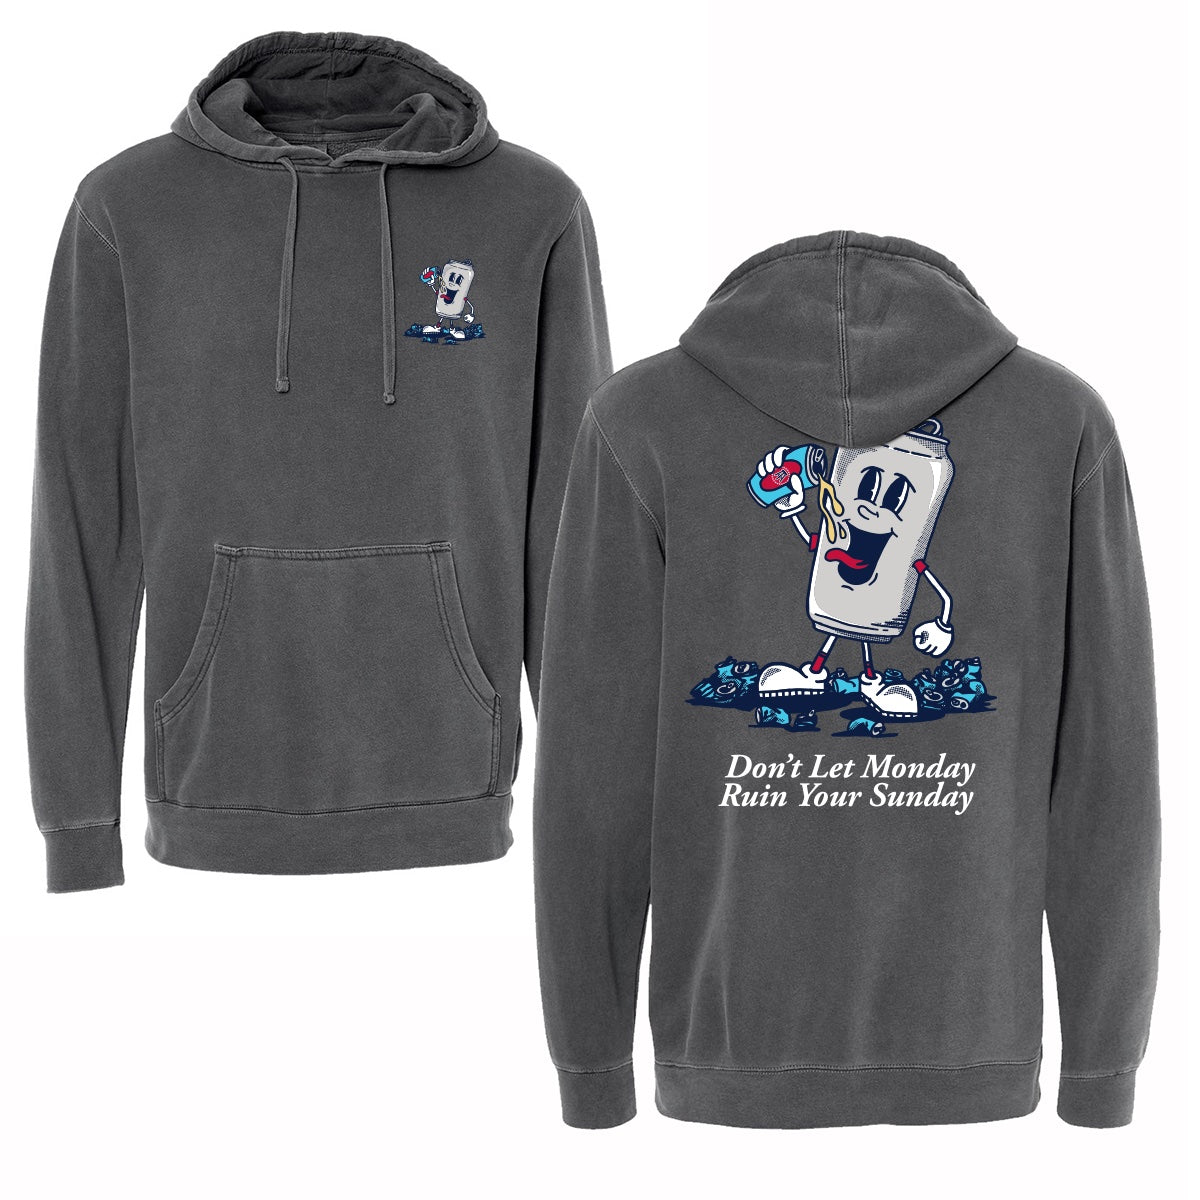 Don't Let Monday Ruin Your Sunday Graphic Hoodie-Hoodies & Sweatshirts-Barstool Sports-Black-S-Barstool Sports